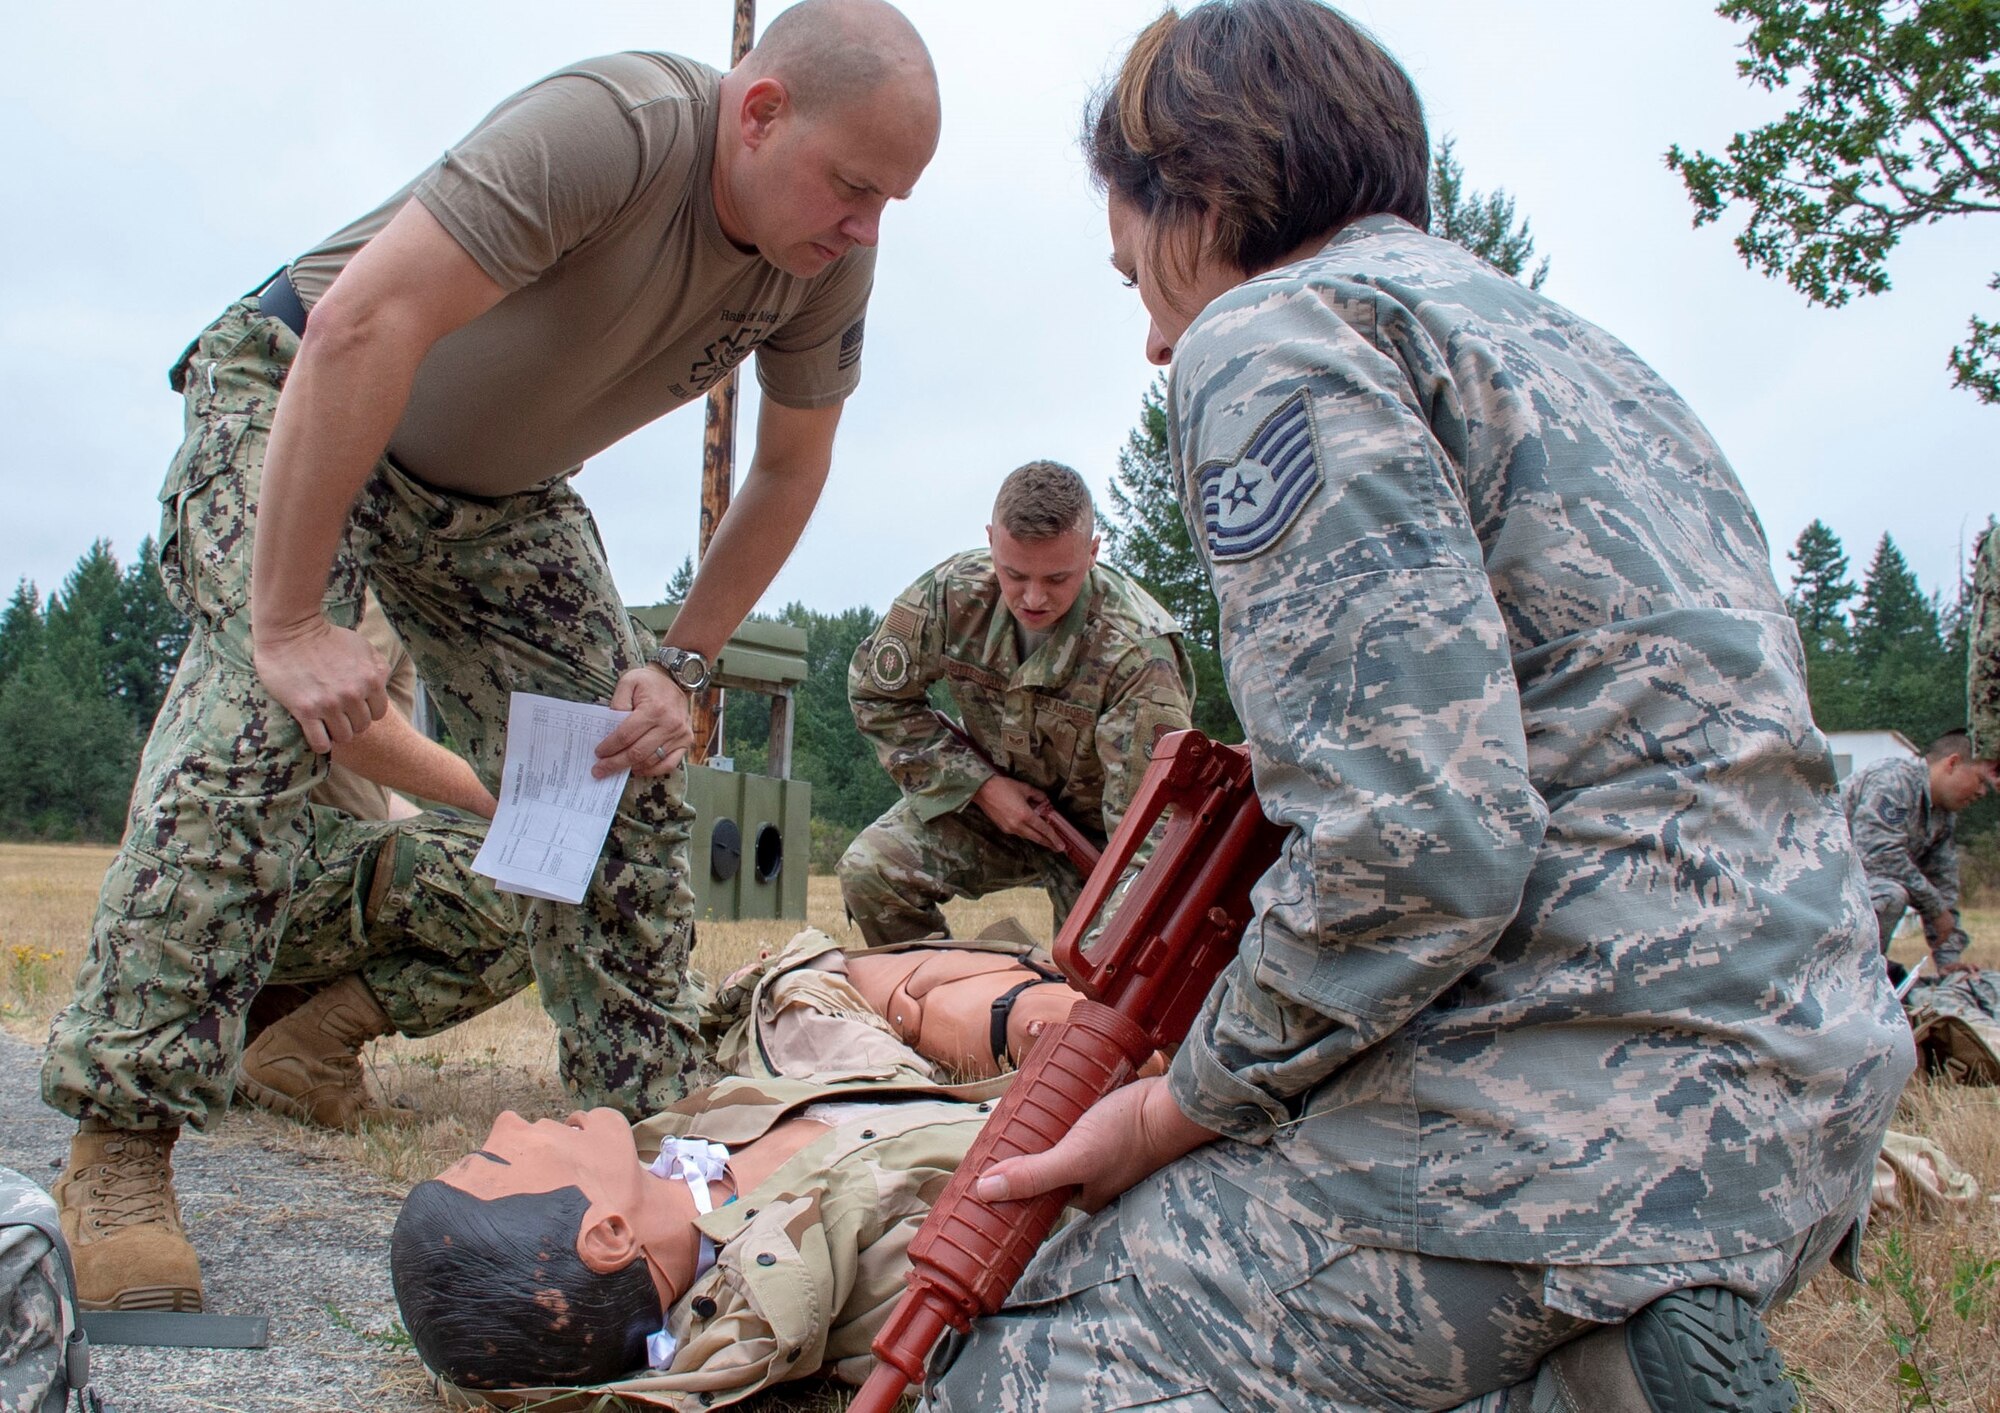 Hospital Corpsman 1st Class Rob Johnston, an instructor assigned to Navy Reserve Navy Medicine Education and Training Command and selected for the rank of chief, evaluates U.S. Air Force Tech Sgt. Kristin Trujeque tending to a simulated casualty during a tactical combat casualty care (TCCC) class for exercise Tropic Halo 2019 at Joint Base Lewis-McChord in Tacoma, Wash., Aug. 7, 2019. Tropic Halo is designed to enhance Operational Hospital Support Unit Bremerton's medical and mission capabilities on several levels: increase TCCC and trauma nurse core course readiness rates while minimizing overall training costs; promote intra-service cohesion with collaborative training in a joint service environment and leverage Navy and Air Force command assets to generate better training opportunities. (U.S. Navy photo by Mass Communication Specialist 1st Class Ryan Riley)